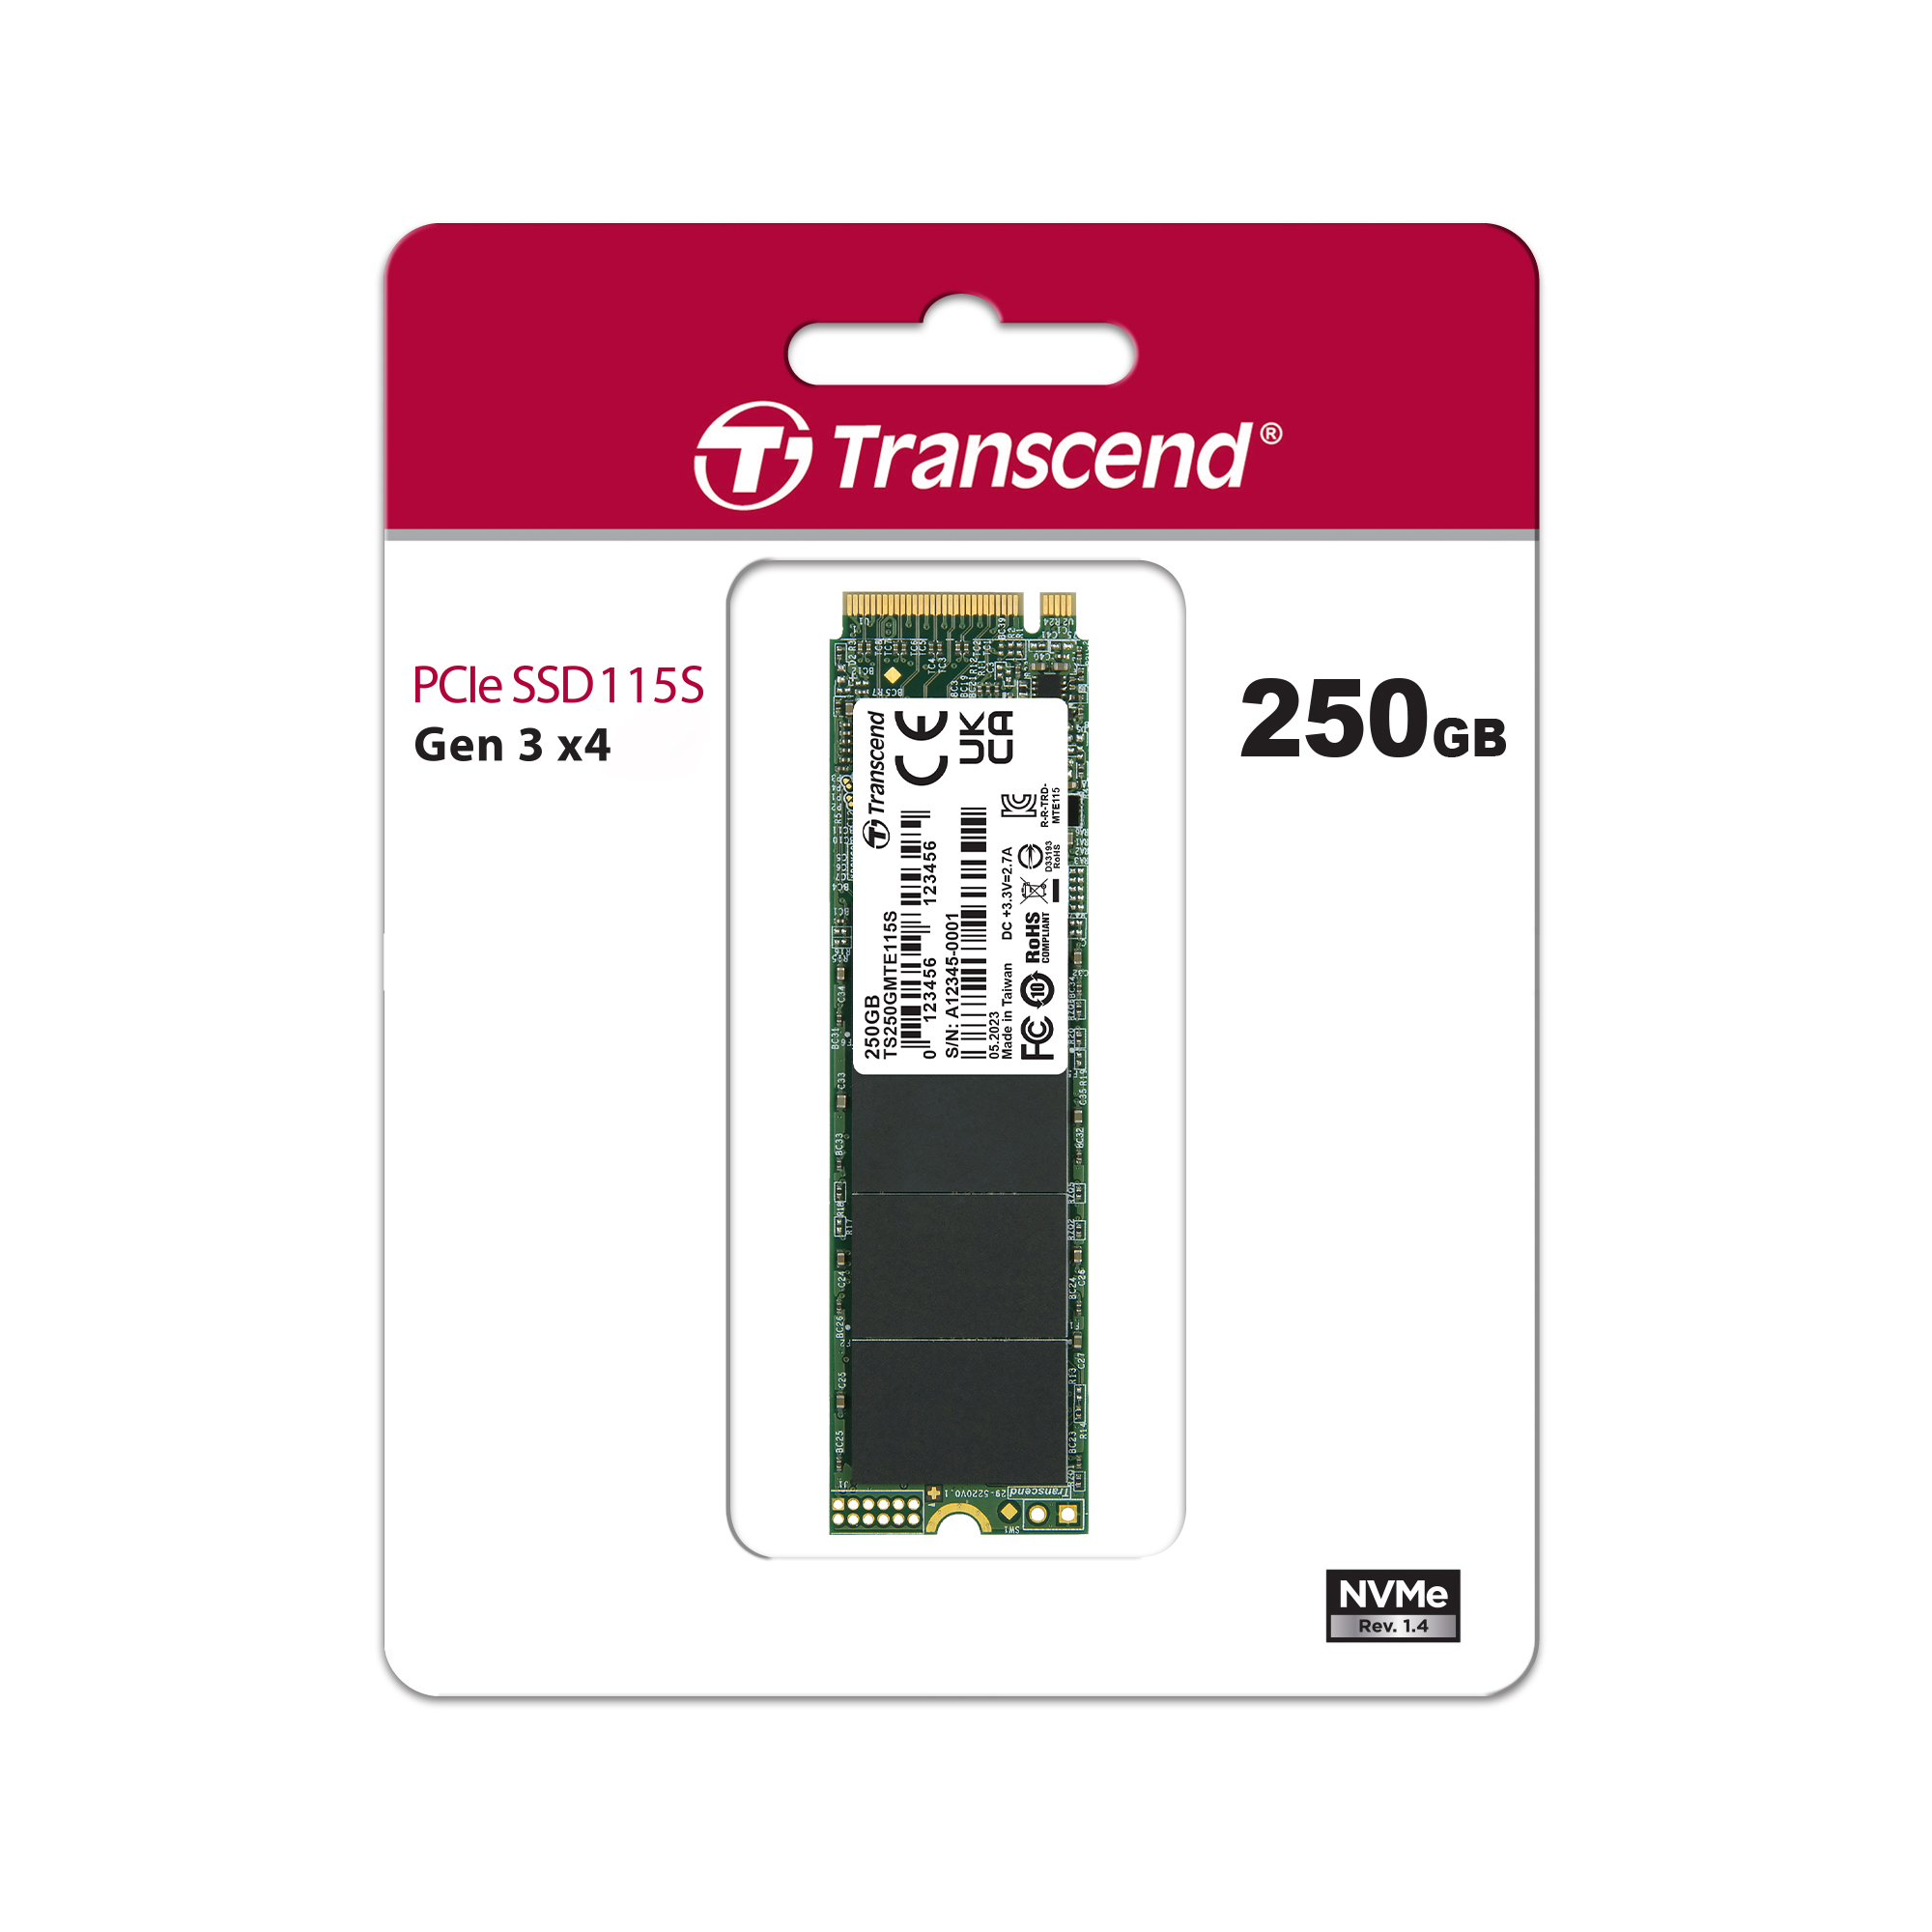 Disque dur interne SSD - 1 To – Transcend - M.2 2280 - PCI Express 3.0 x4  (NVMe) 